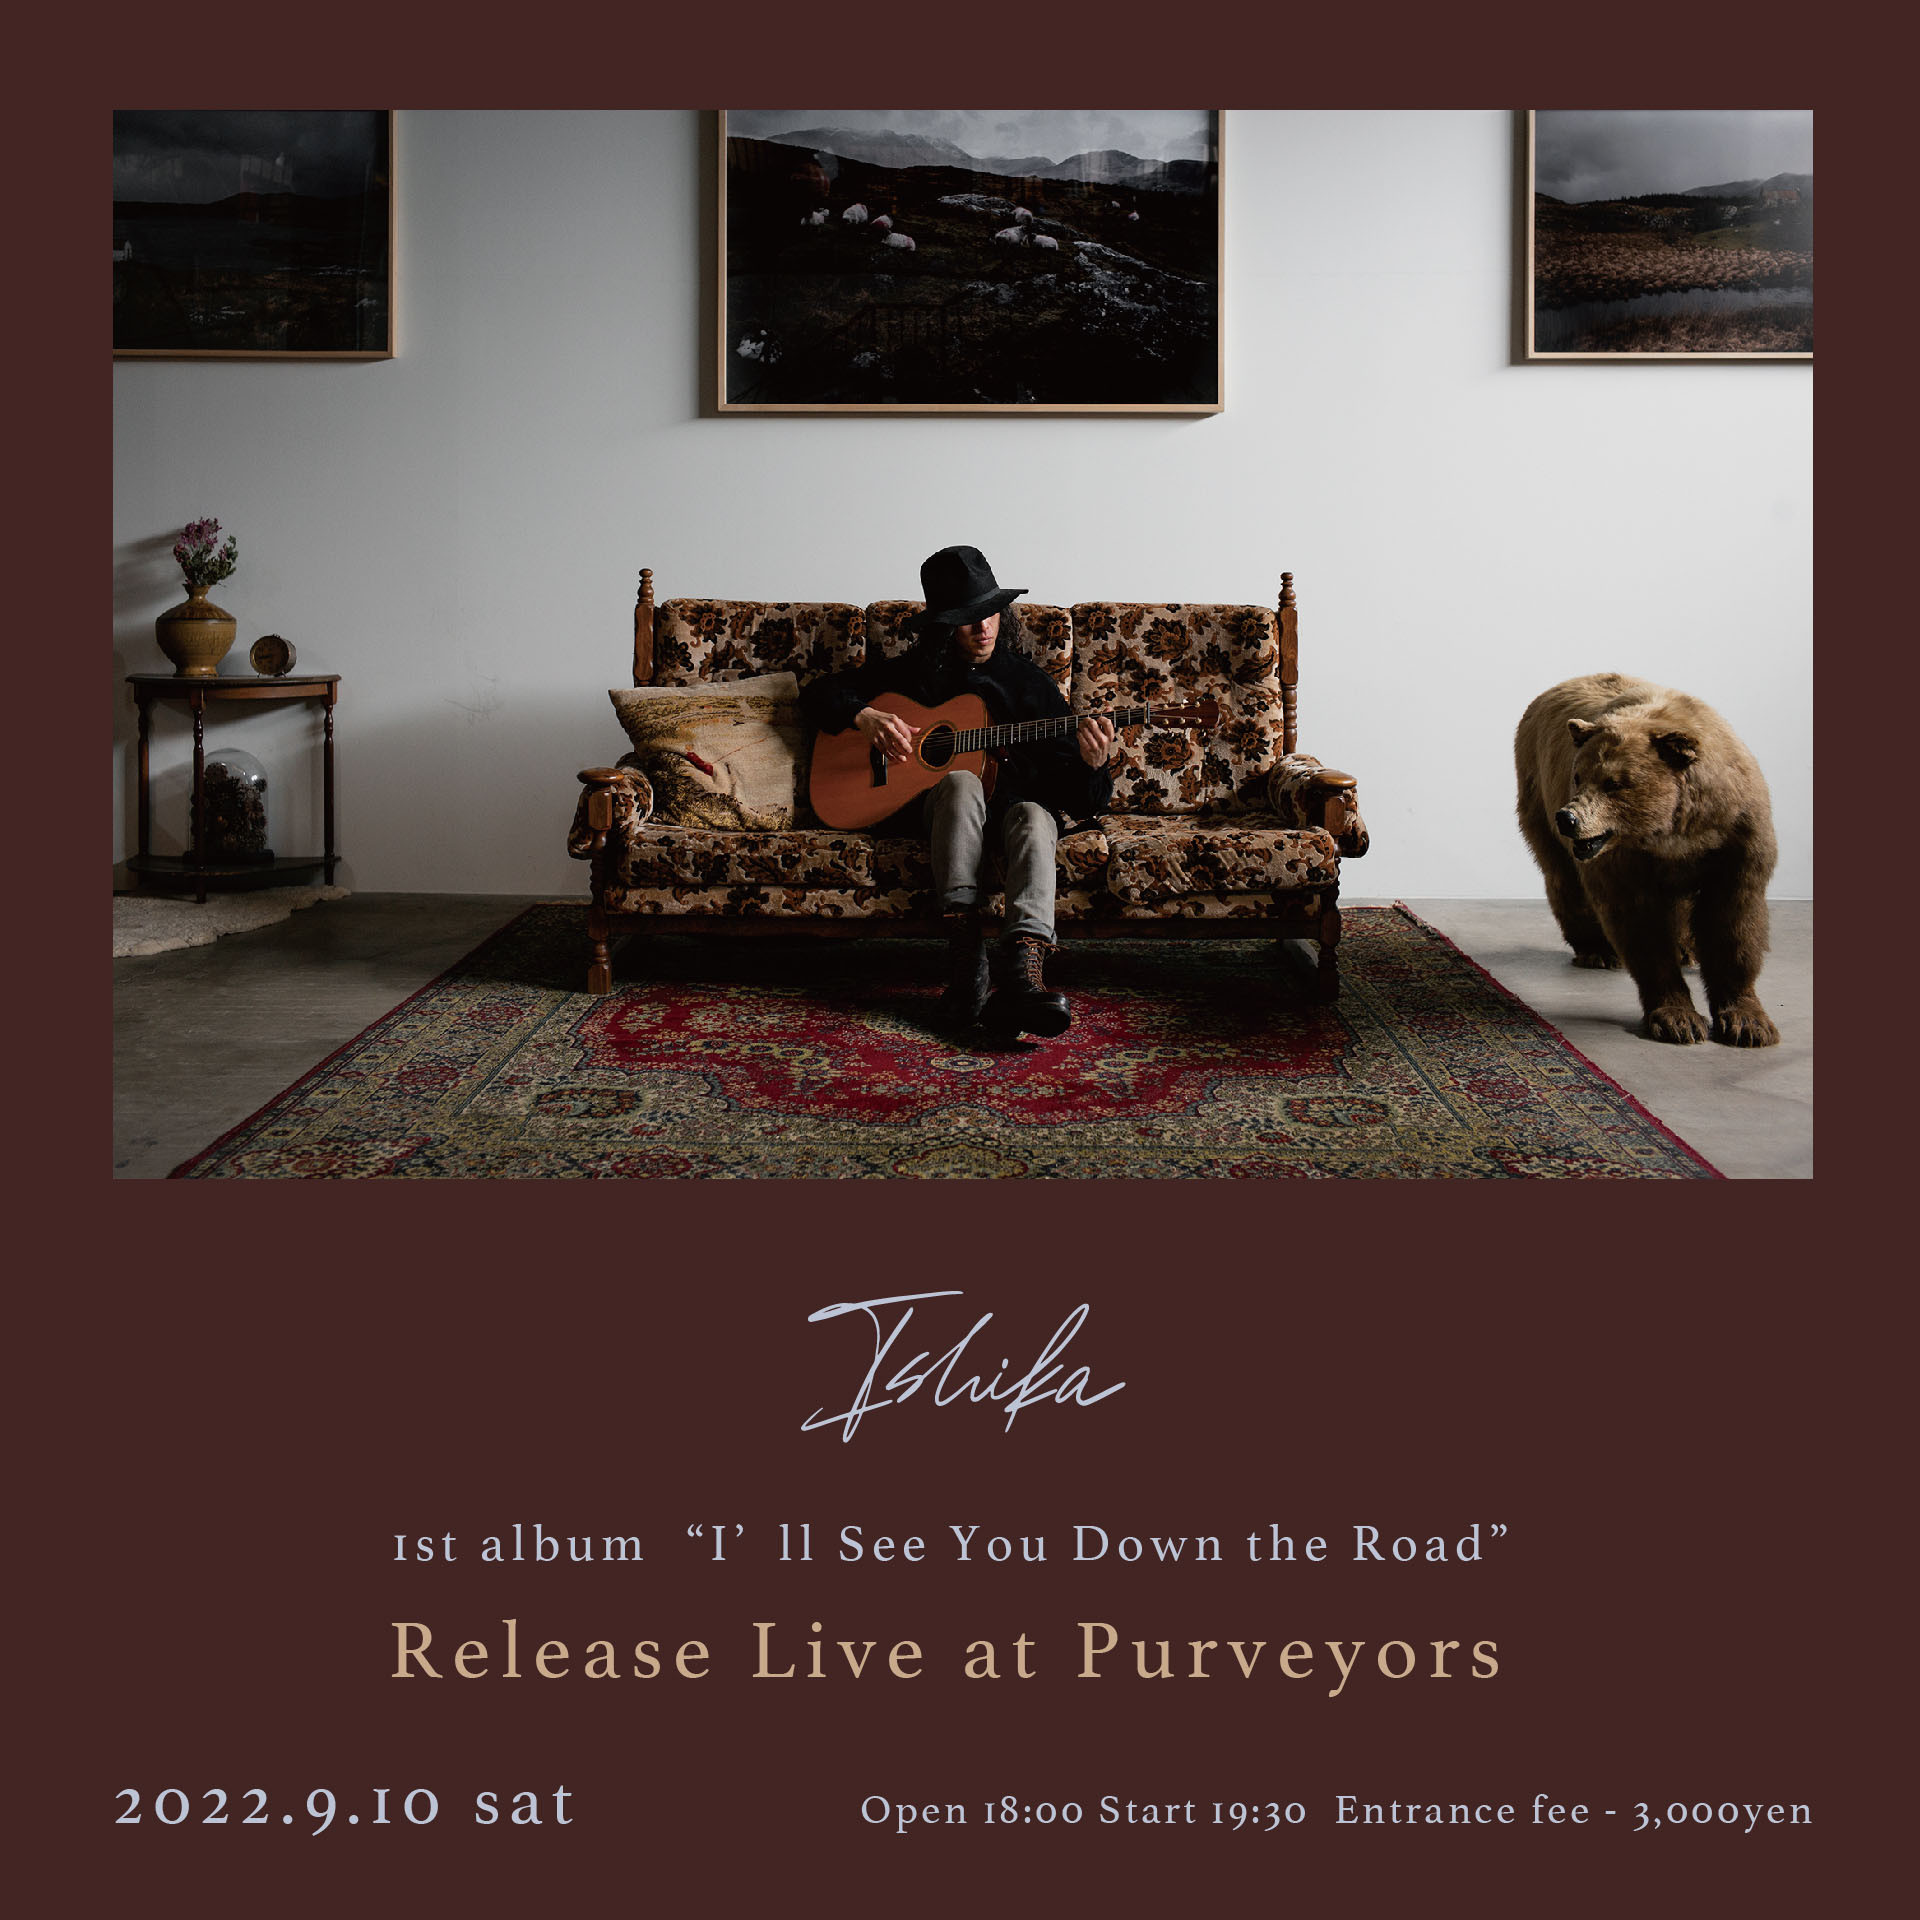 ＜2022/09/10＞Ishika 1st album ‘I’ll See You Down the Road’ Release Live at Purveyors